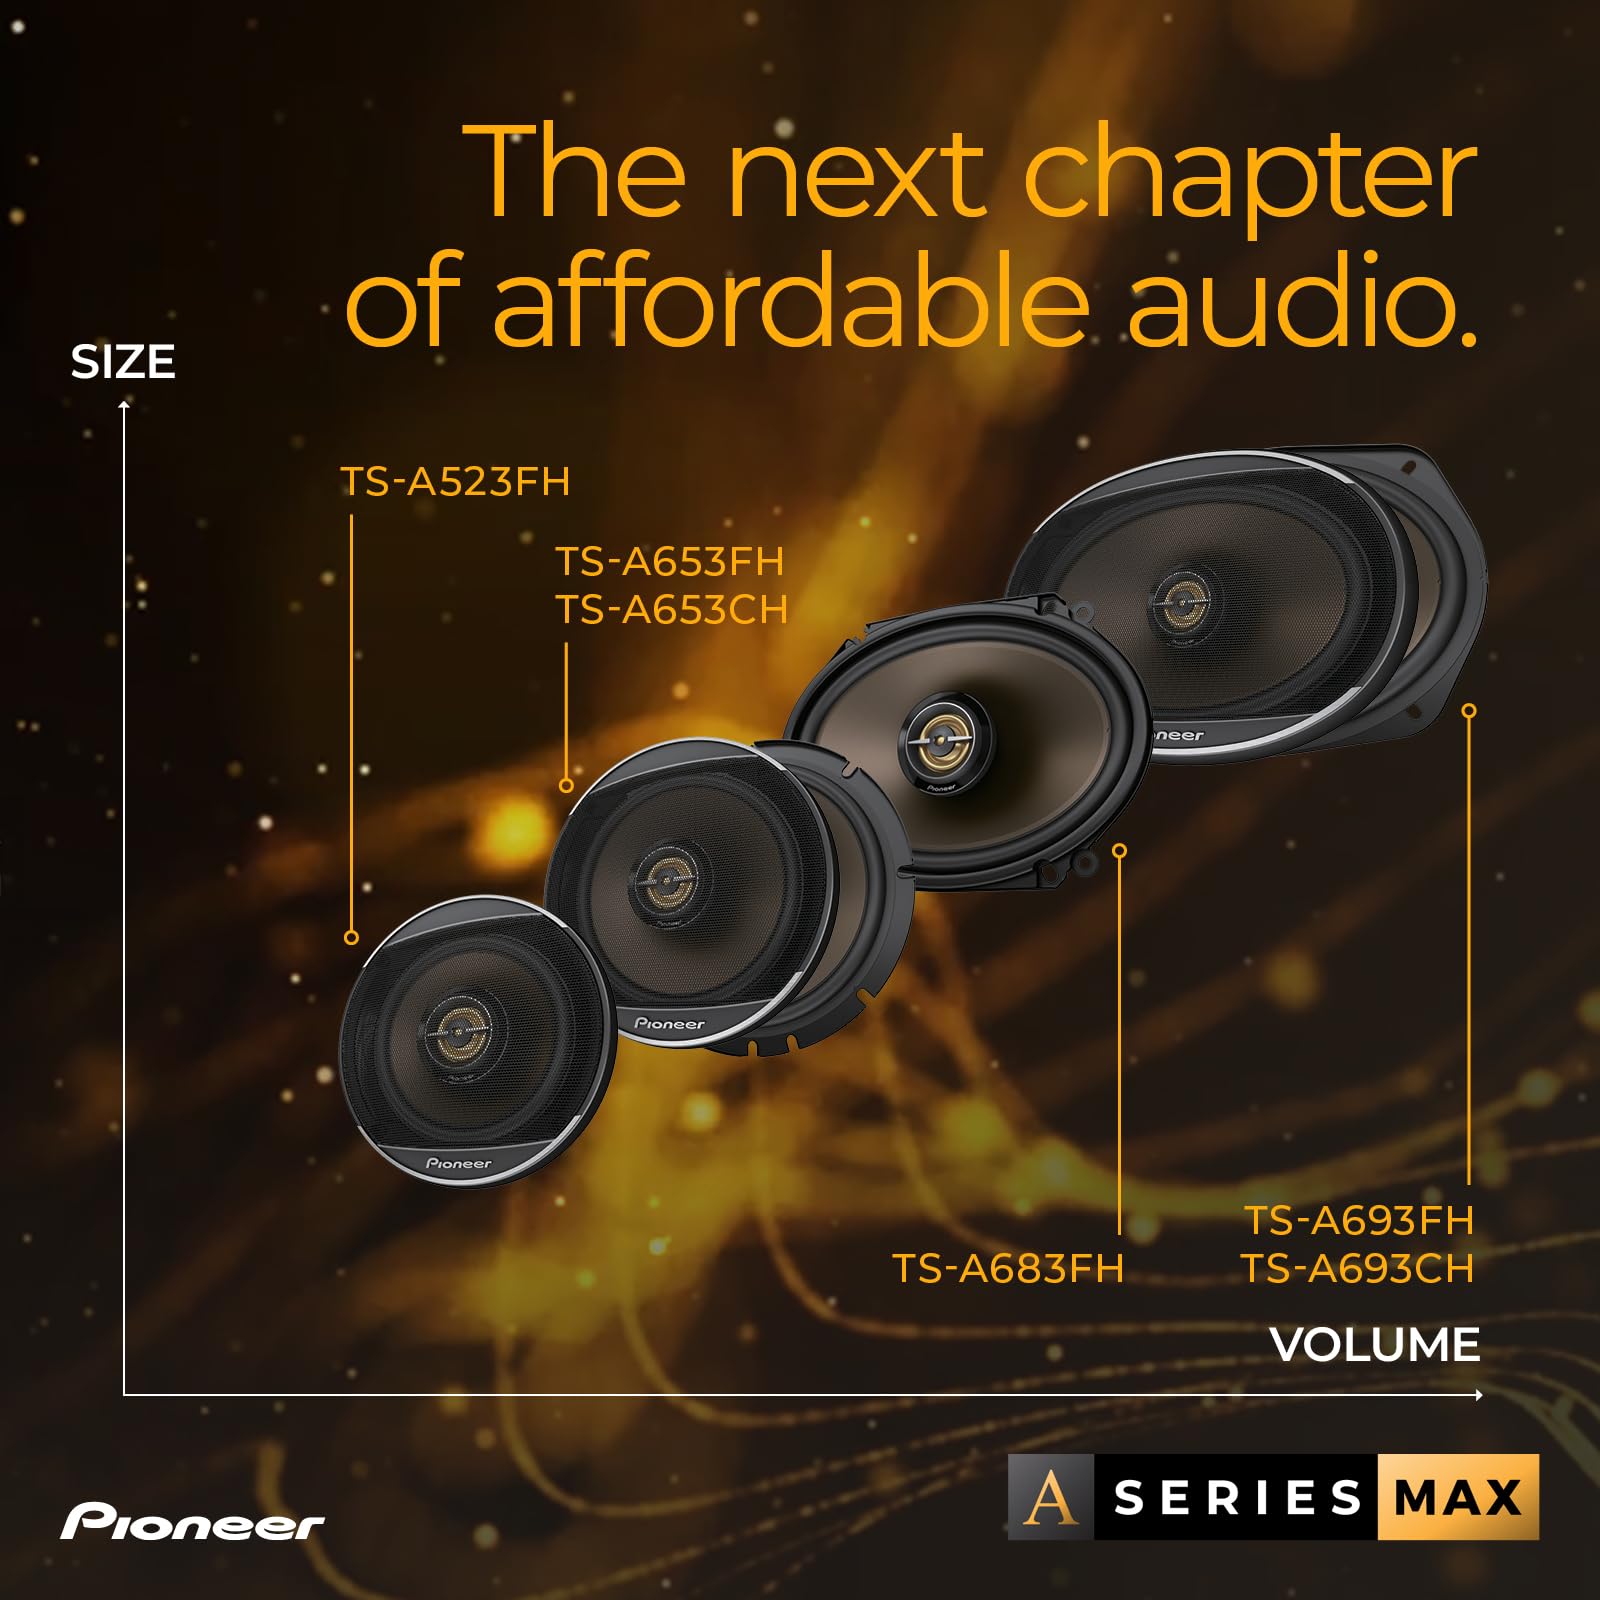 PIONEER A-Series MAX TS-A693FH, 2-Way Coaxial Car Audio Speakers, Full Range, Clear Sound Quality, Easy Installation and Enhanced Bass Response, Full Gold Colored 6” x 9” Oval Speakers